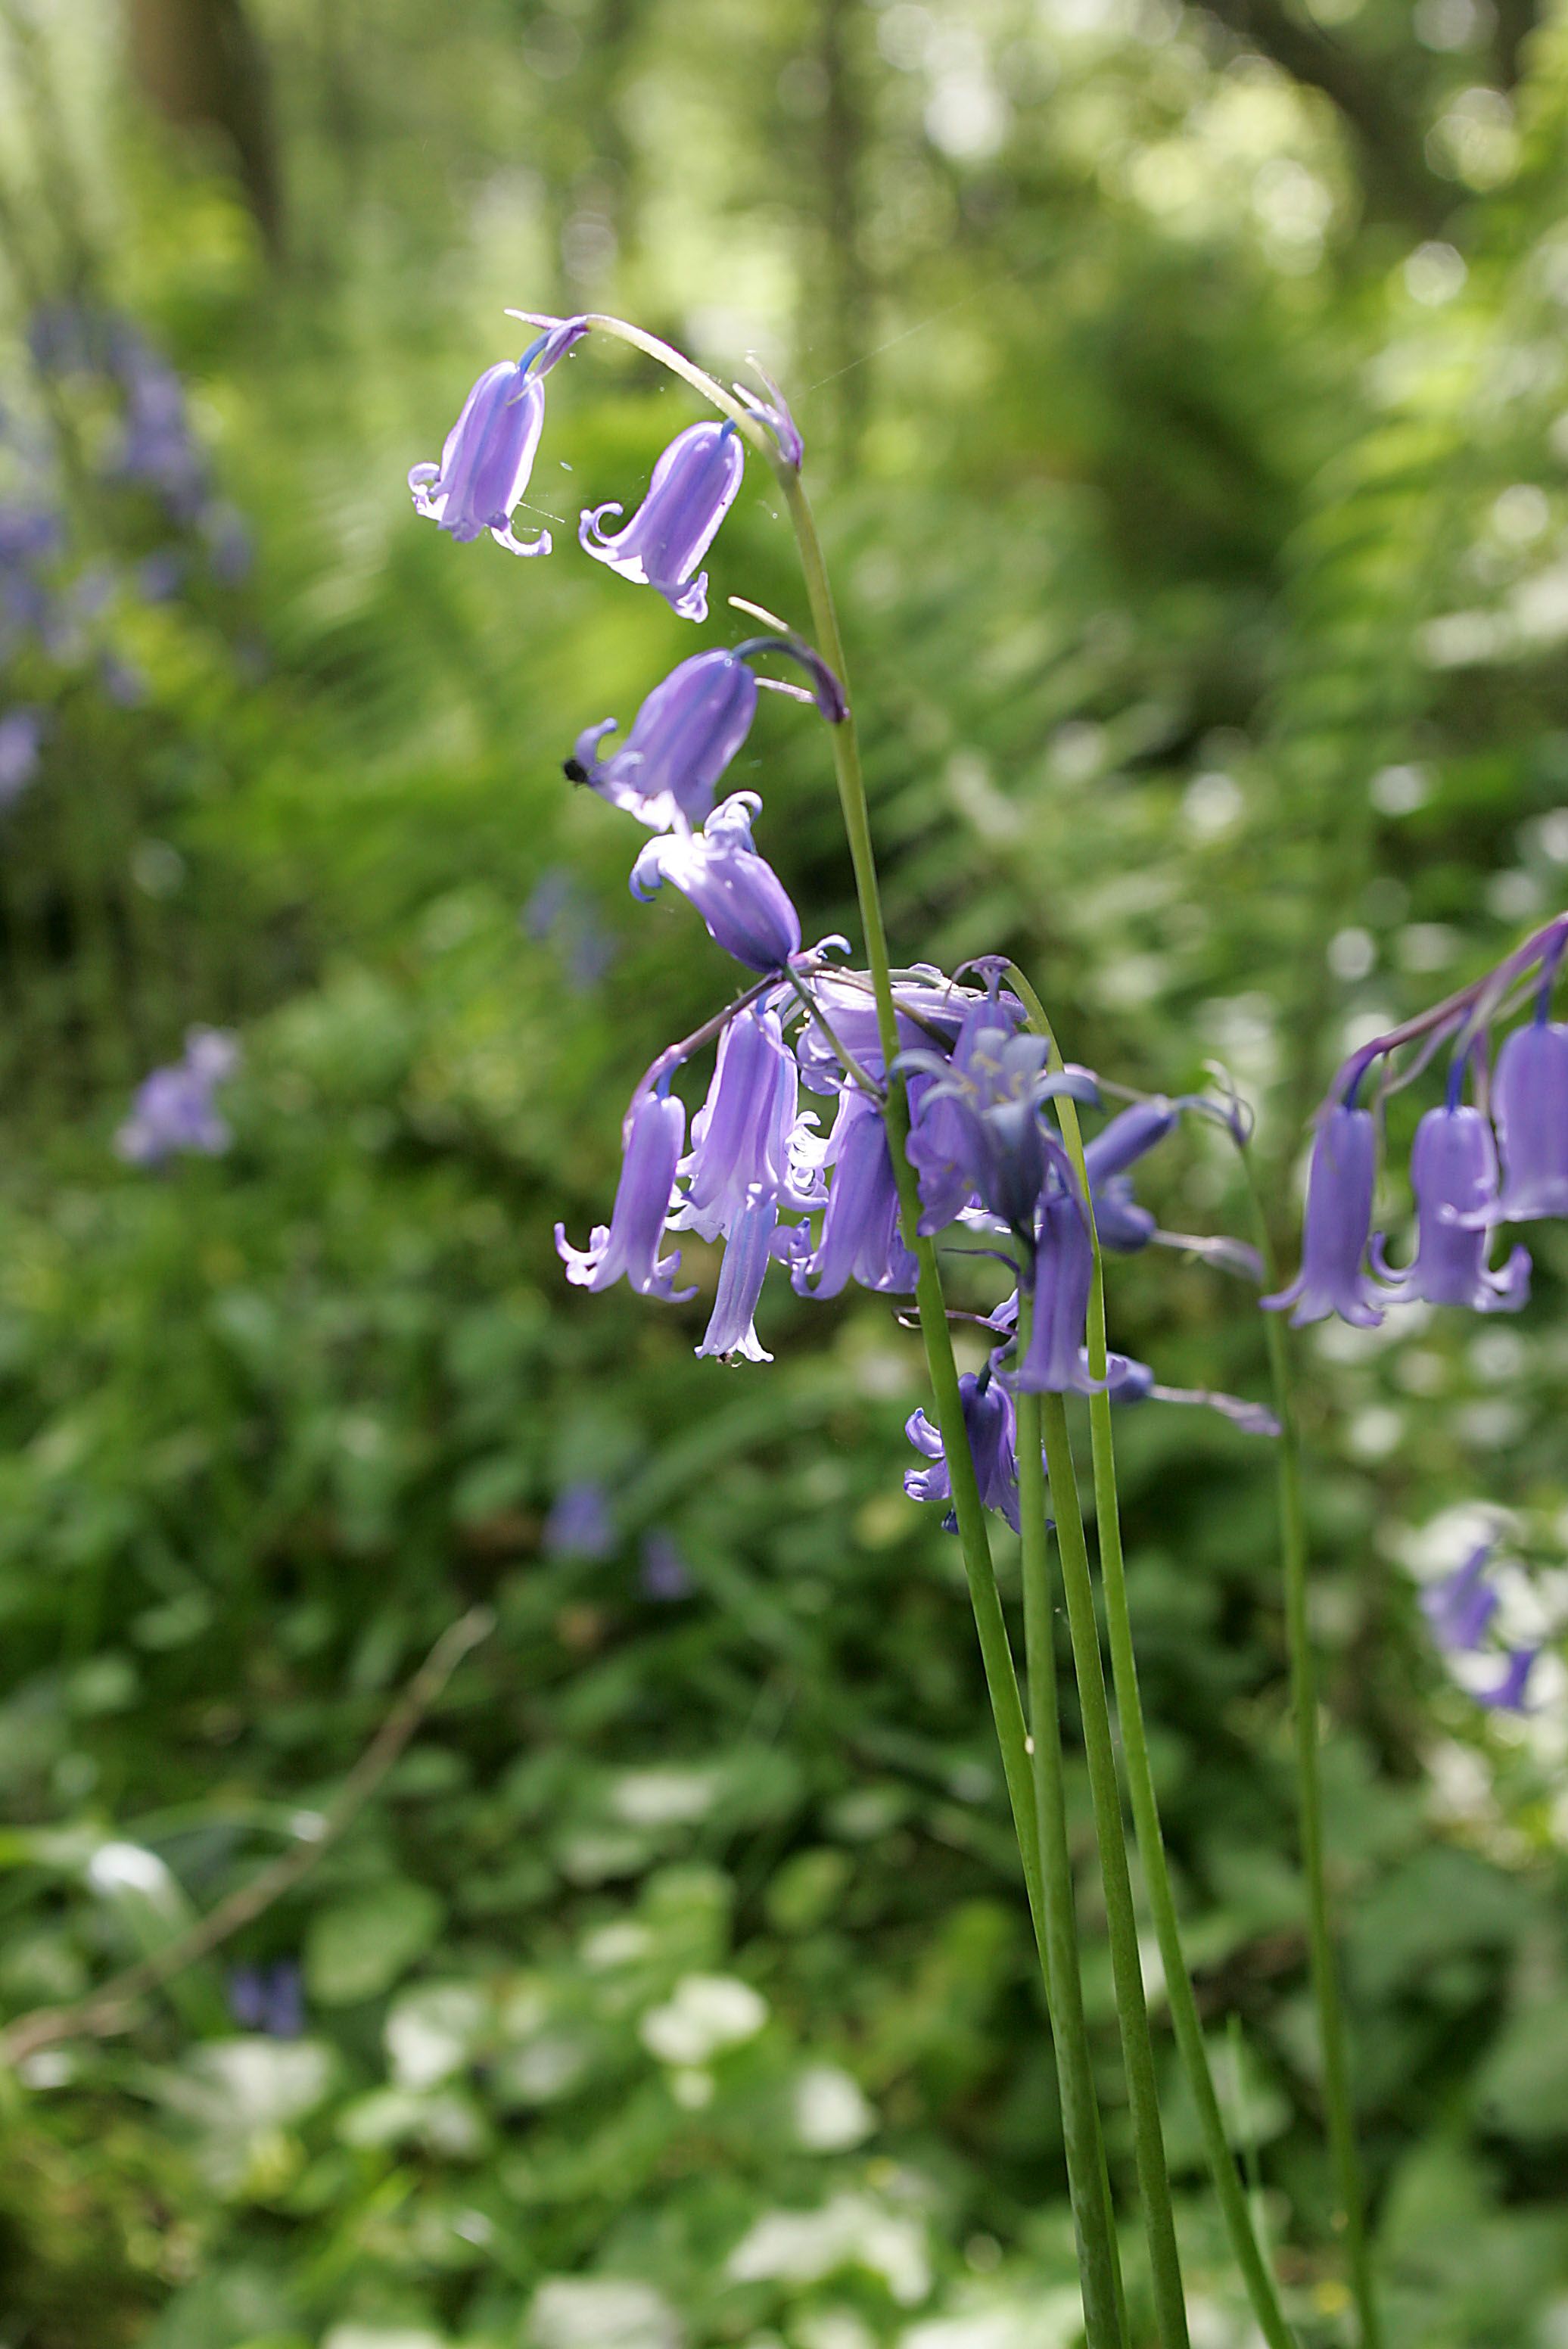 COMMUNITY: The bluebells bloomed as music and poetry filled the Black Mountain air